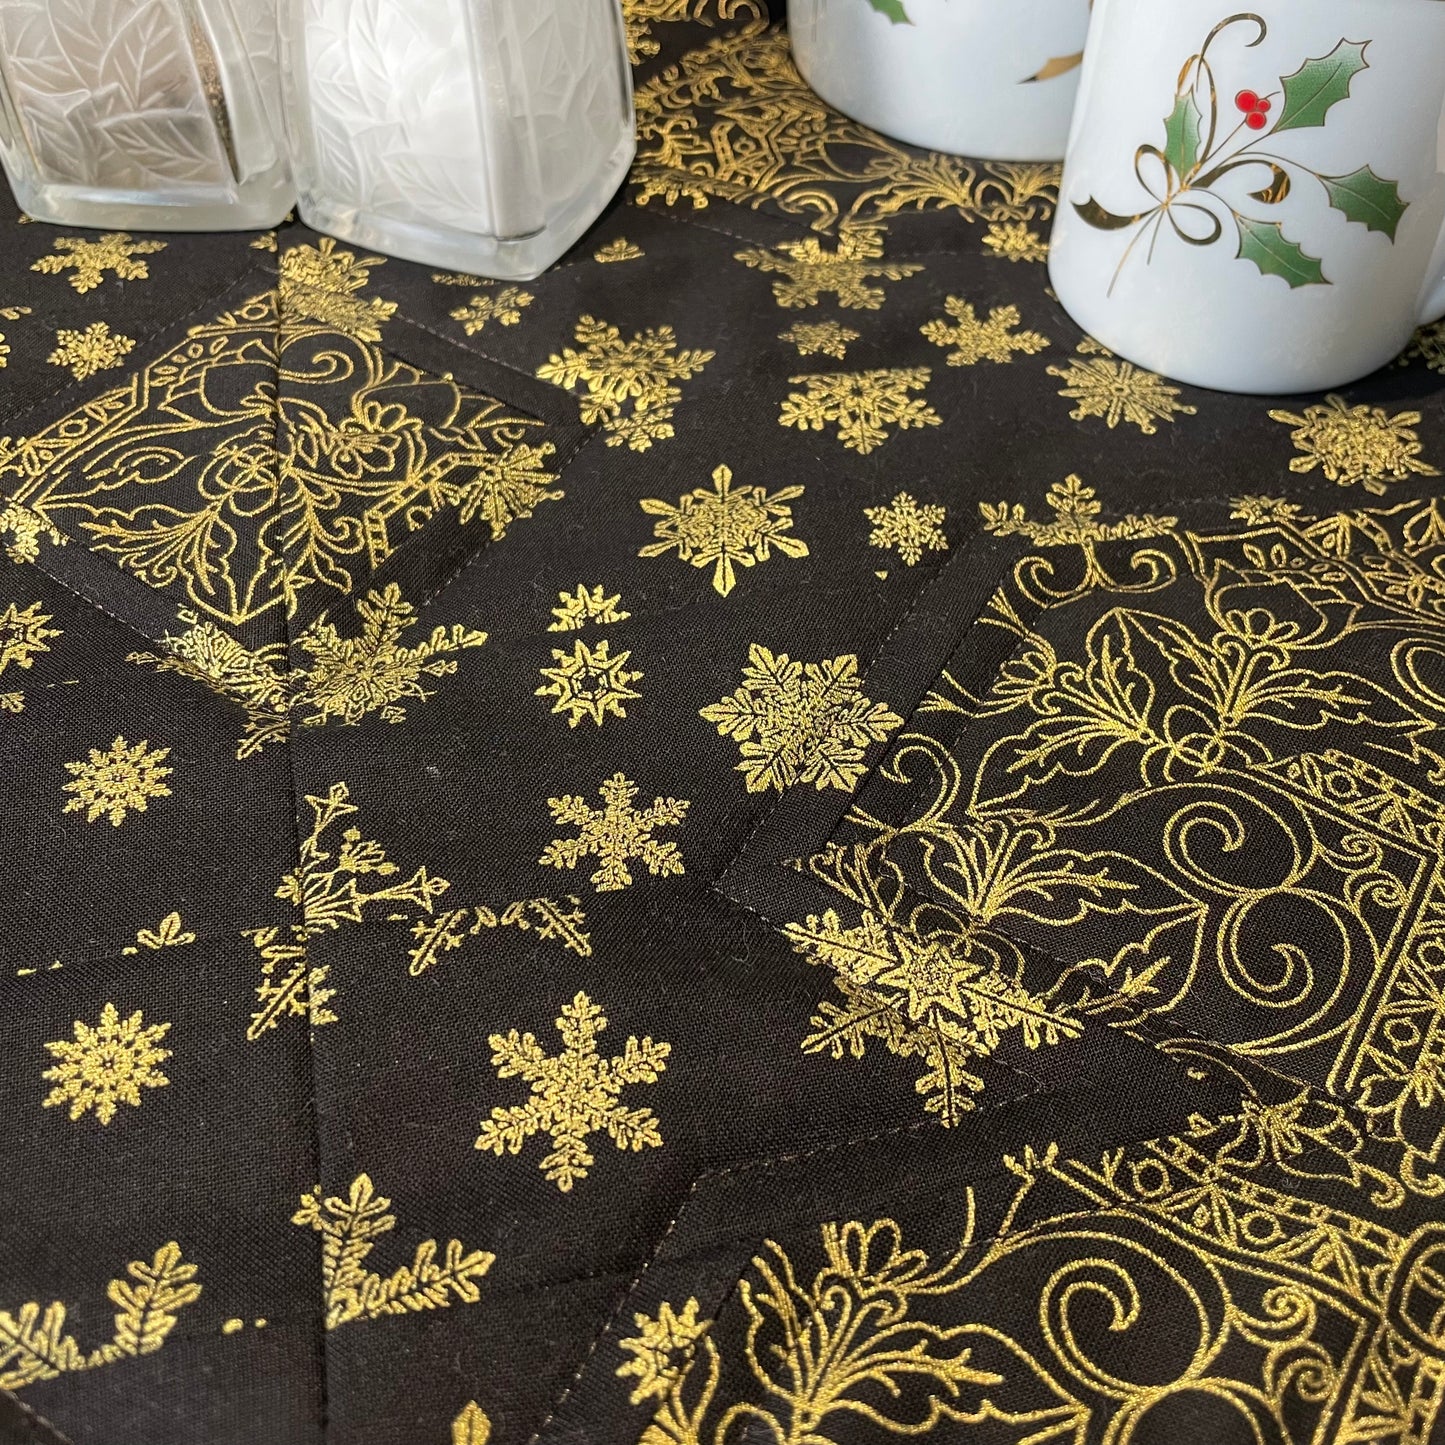 Quilted Black and Gold Christmas Table Centerpiece - Home Stitchery Decor